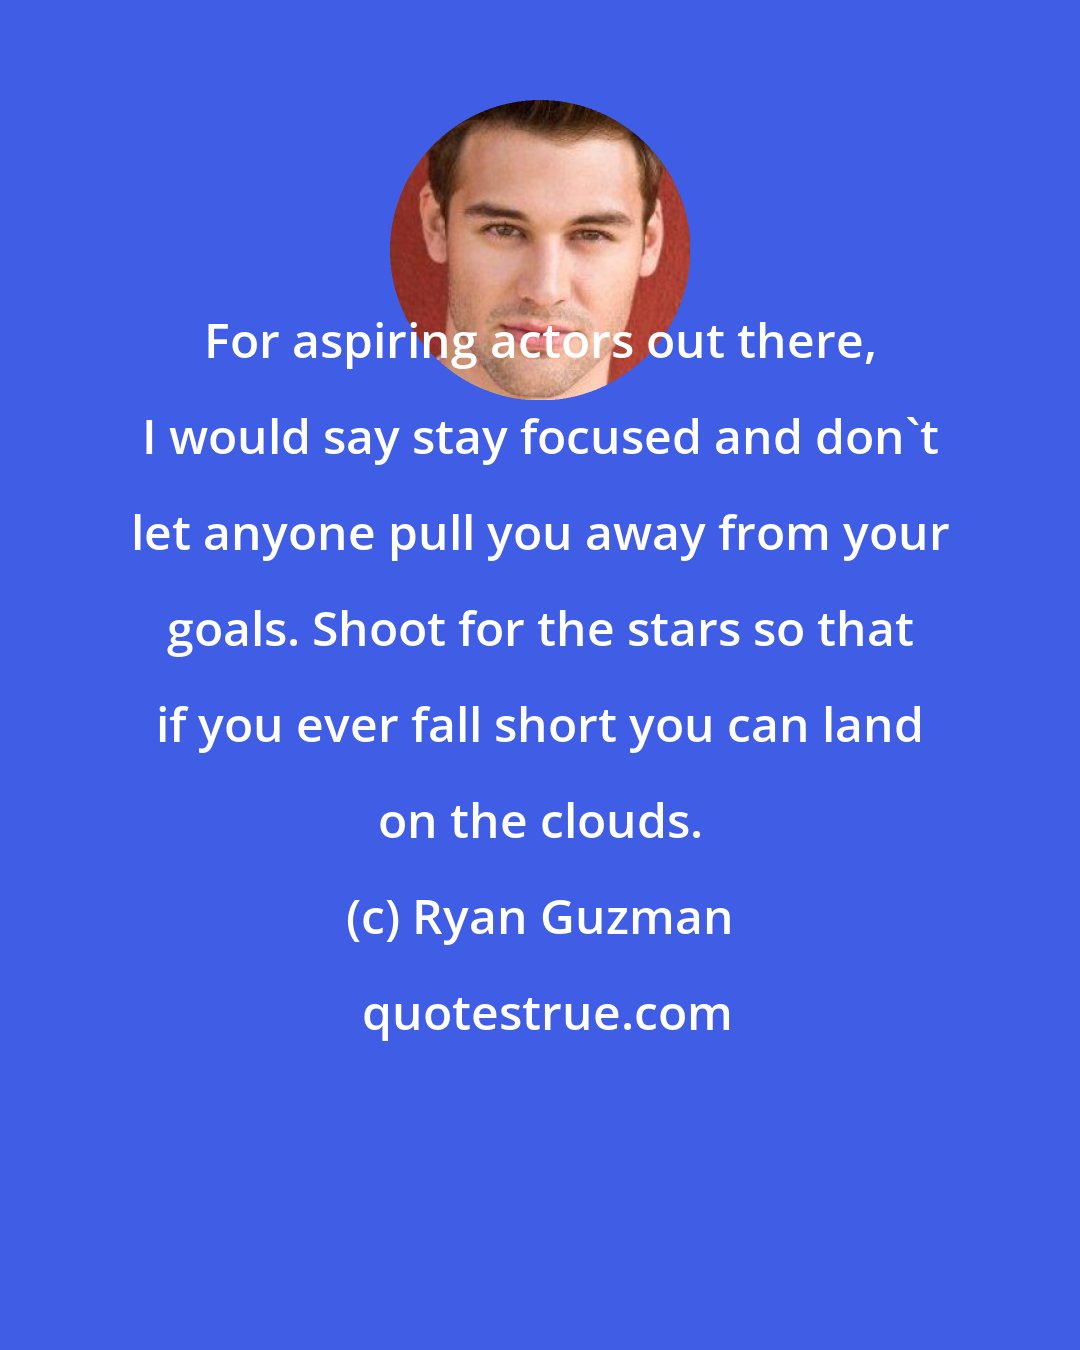 Ryan Guzman: For aspiring actors out there, I would say stay focused and don't let anyone pull you away from your goals. Shoot for the stars so that if you ever fall short you can land on the clouds.